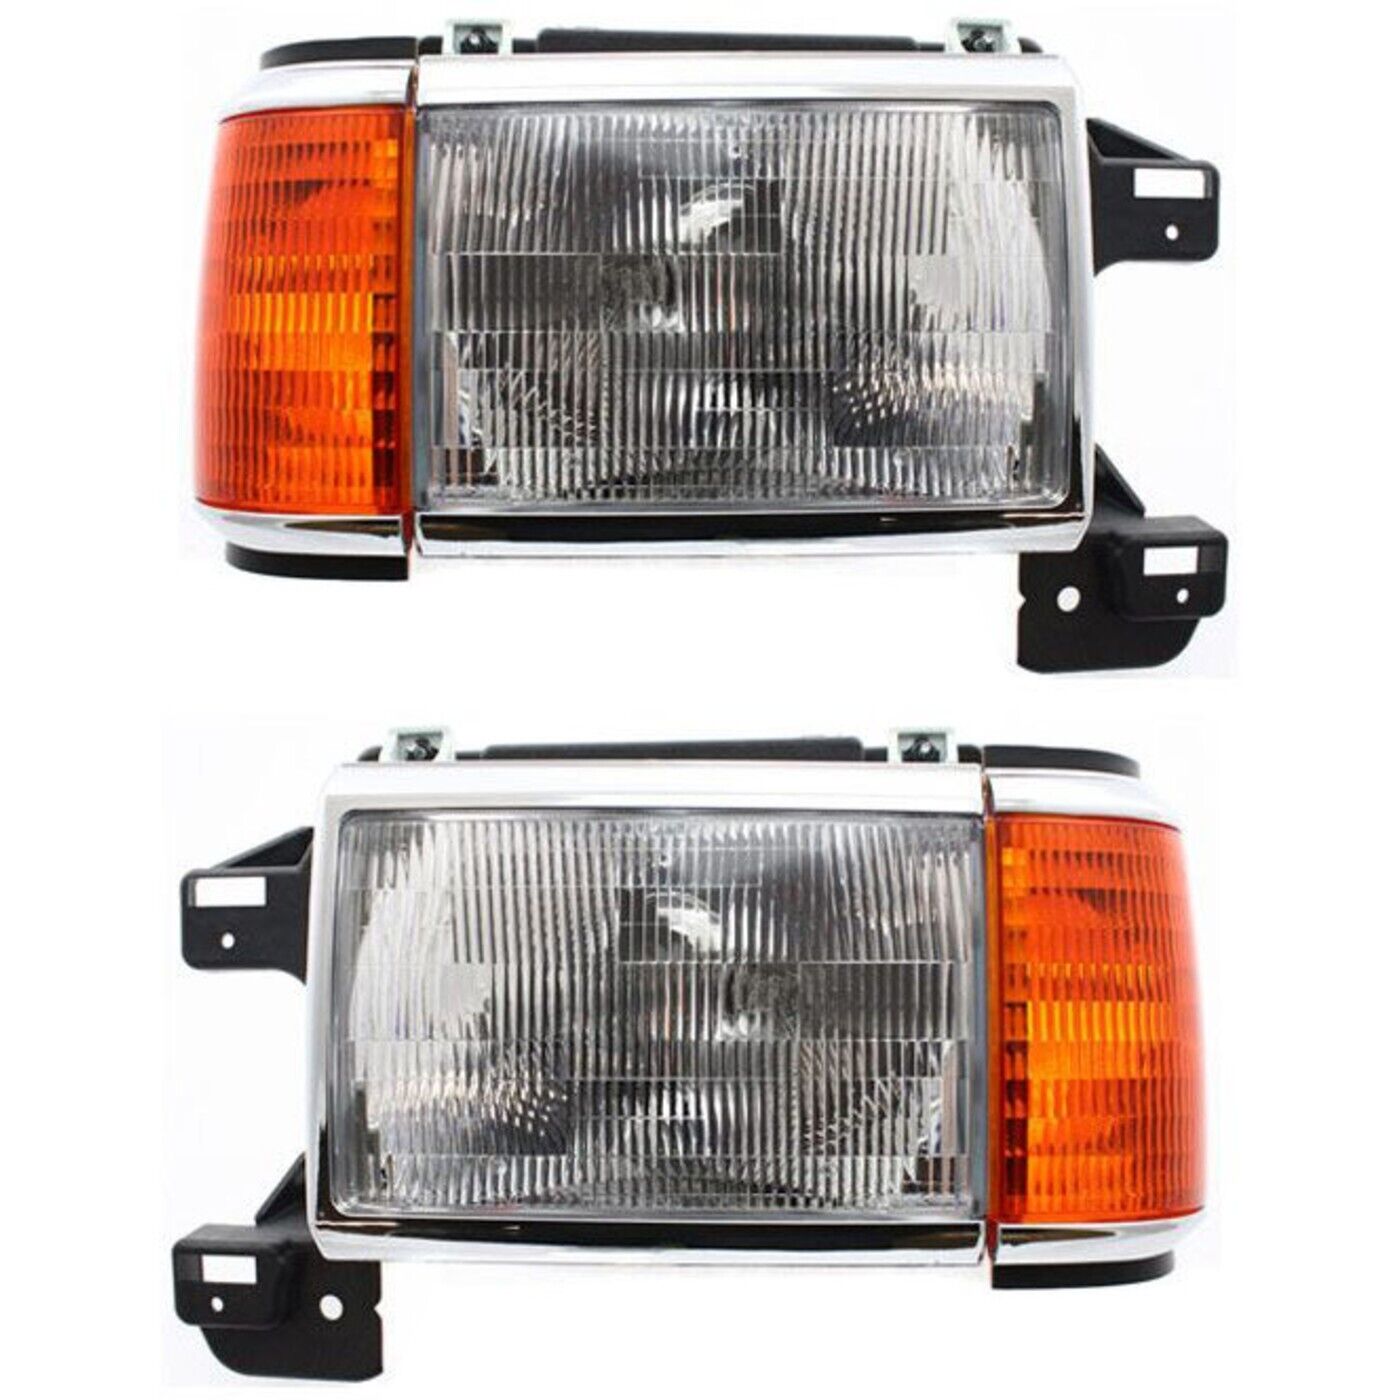 Headlight Set For 87-91 Ford F-150 88-91 F Super Duty Left & Right w/Side Marker